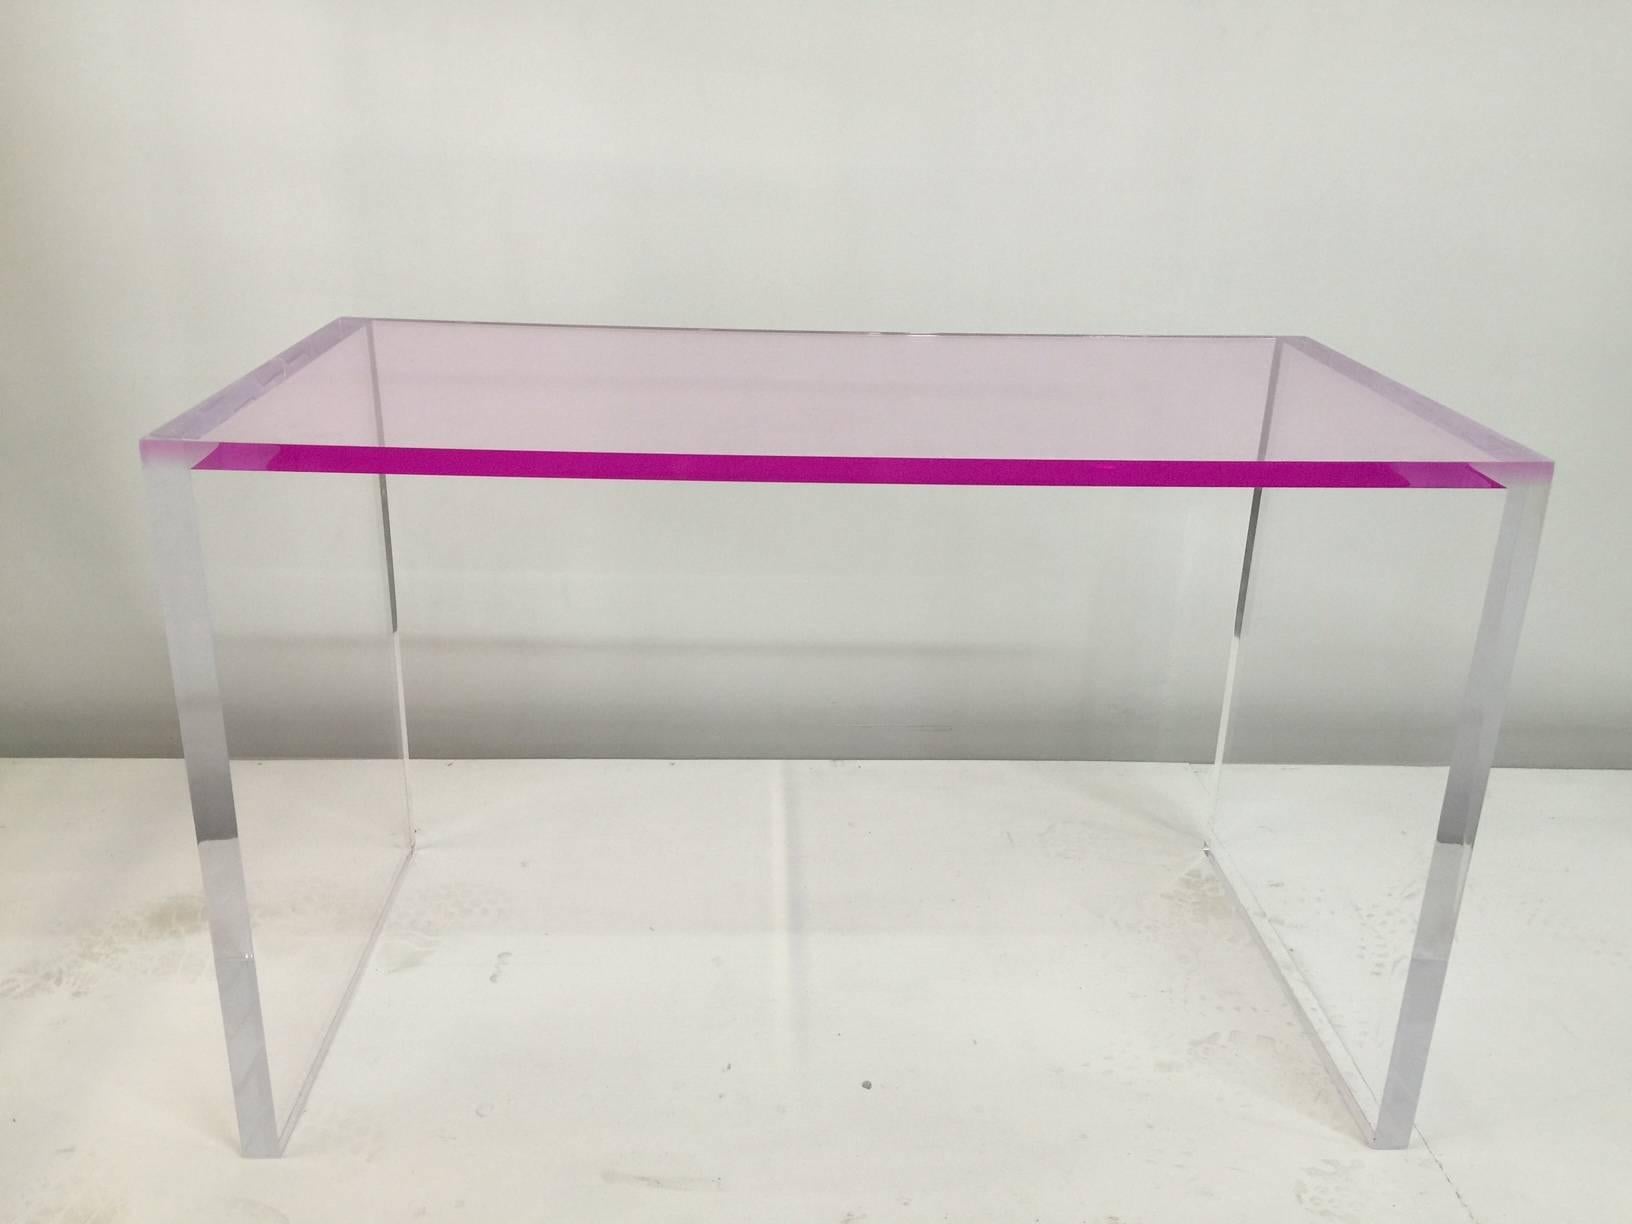 This playful yet elegant desk and bench features a vivid pink top and clear acrylic laterals. The bench has a custom pink bench cushion which can be affixed with the central grommet holes pictured in the detail images.

Bench dimensions: 18 inches